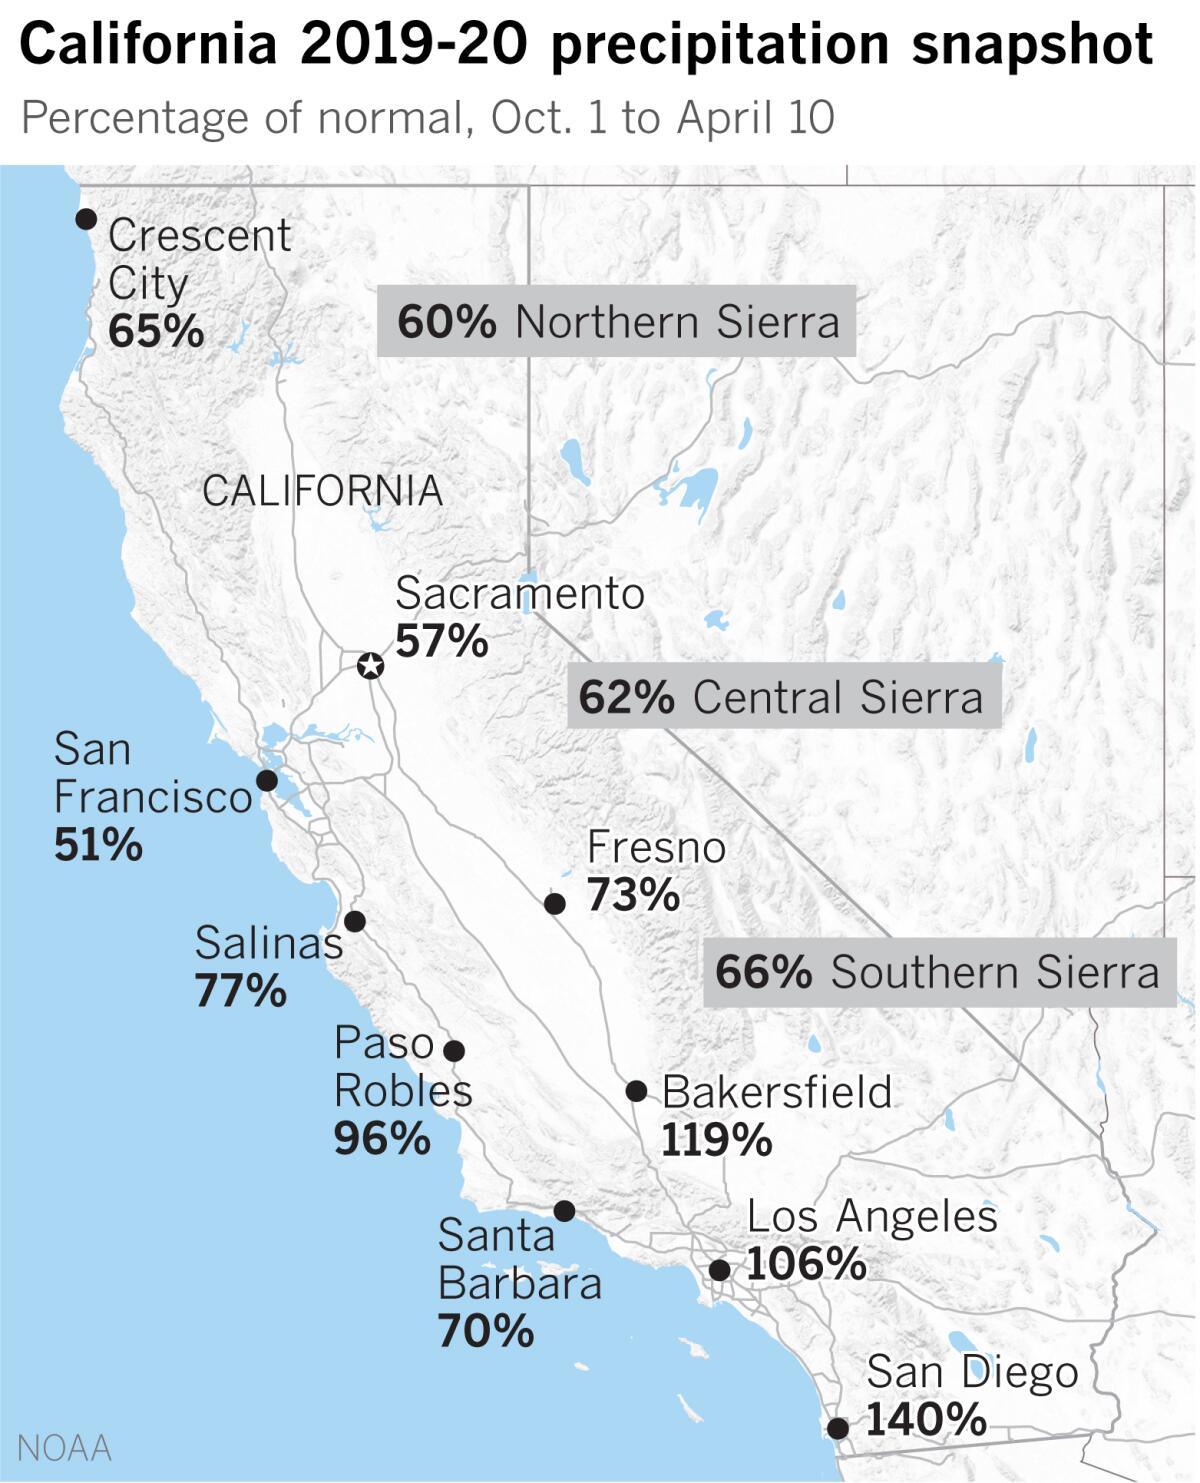 Recent rains have benefited Southern California while Northern California lags behind.